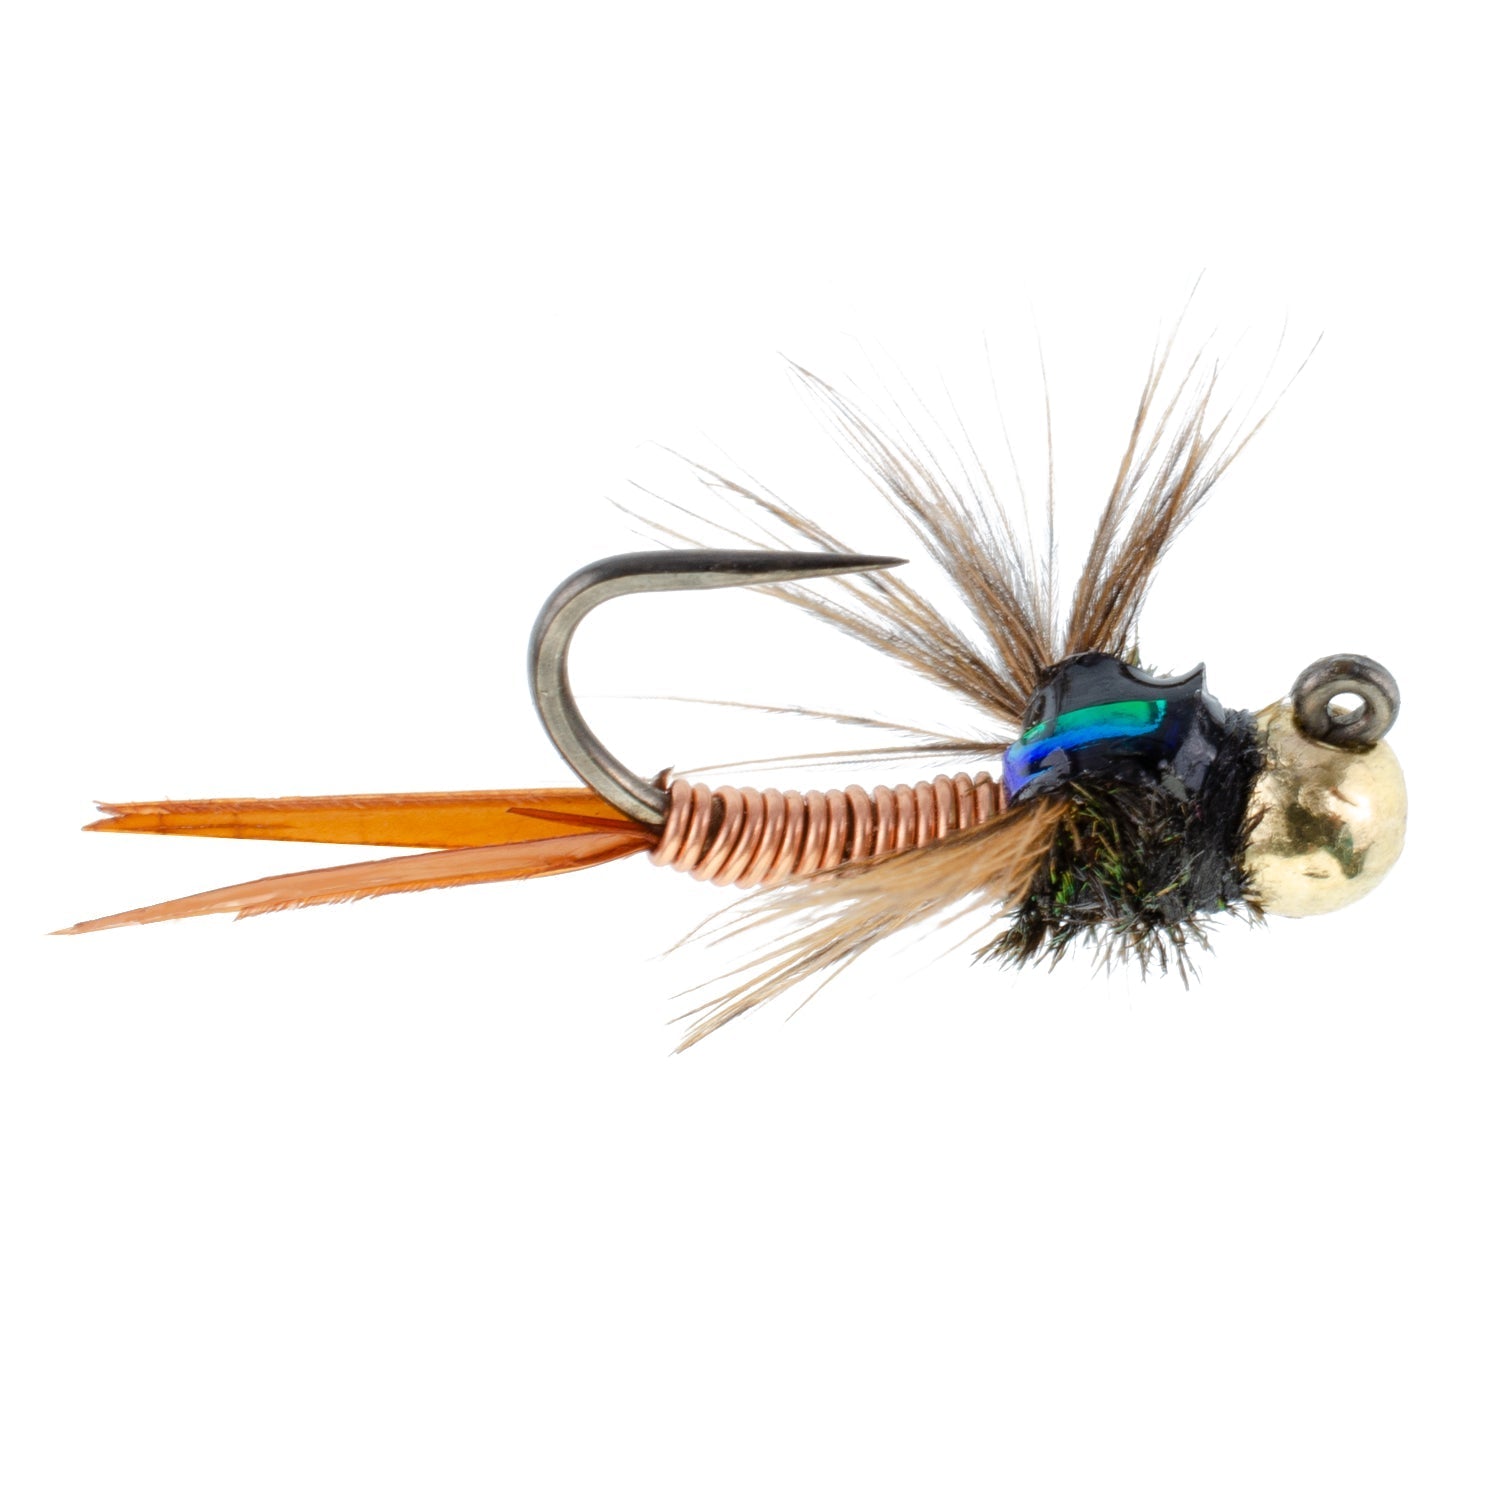 Tactical Tungsten Bead Head Copper John Euro Nymph Assortment Fly Fishing Flies - Collection of 9 Flies 3 Colors Hook Size 12